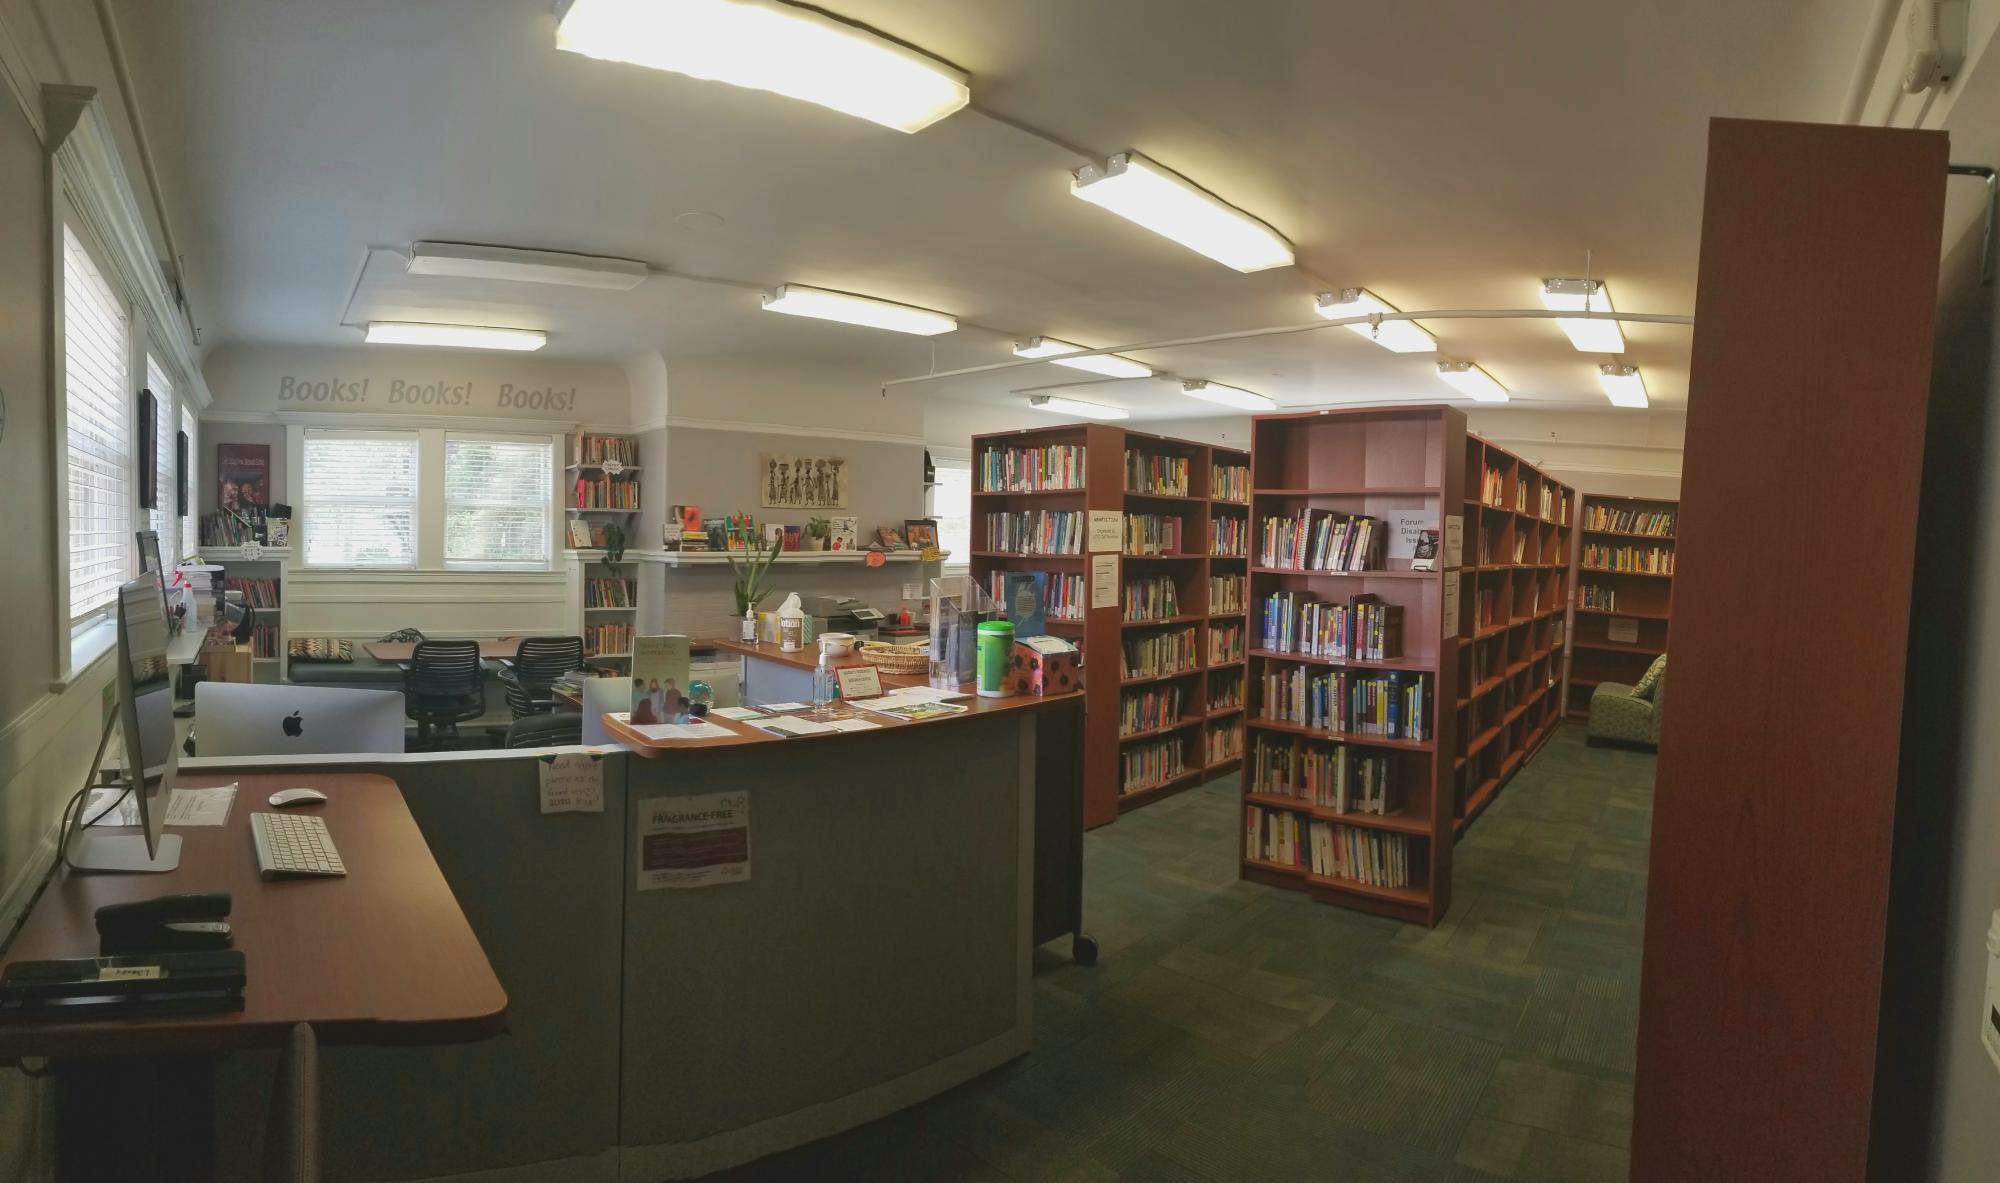 Picture of the inside of the Joy Fergoda library showing the check in desk and rows of books. There are windows in the background and a light olive colored carpet.